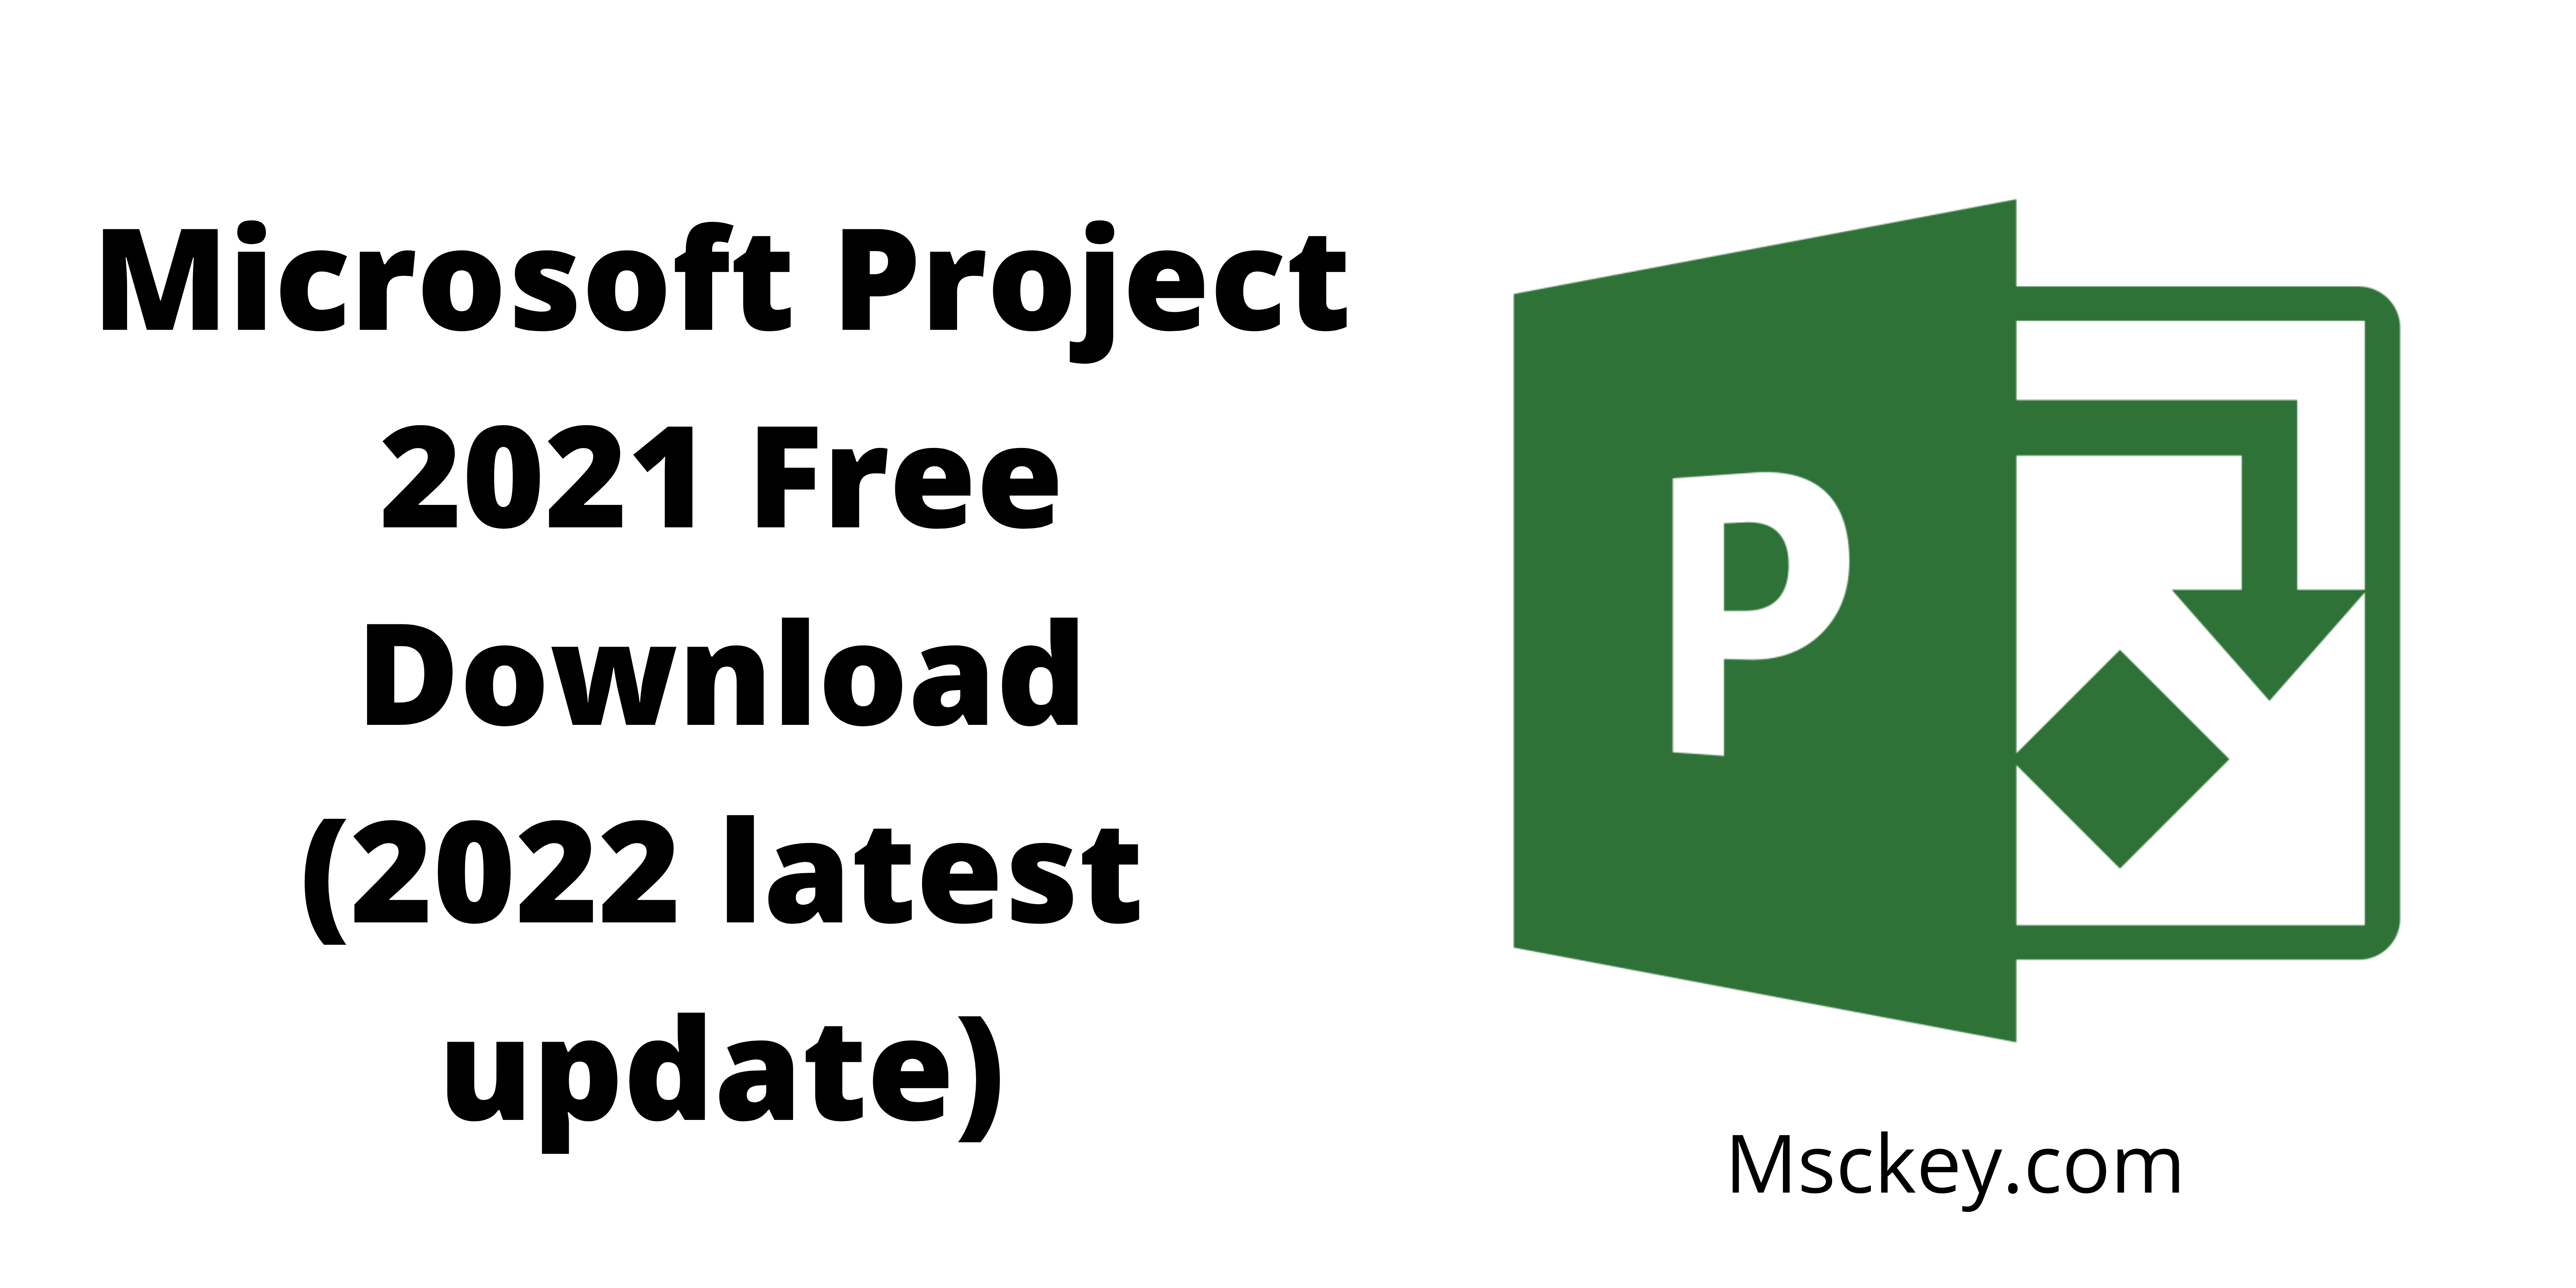 Microsoft Project 2021 Free Download